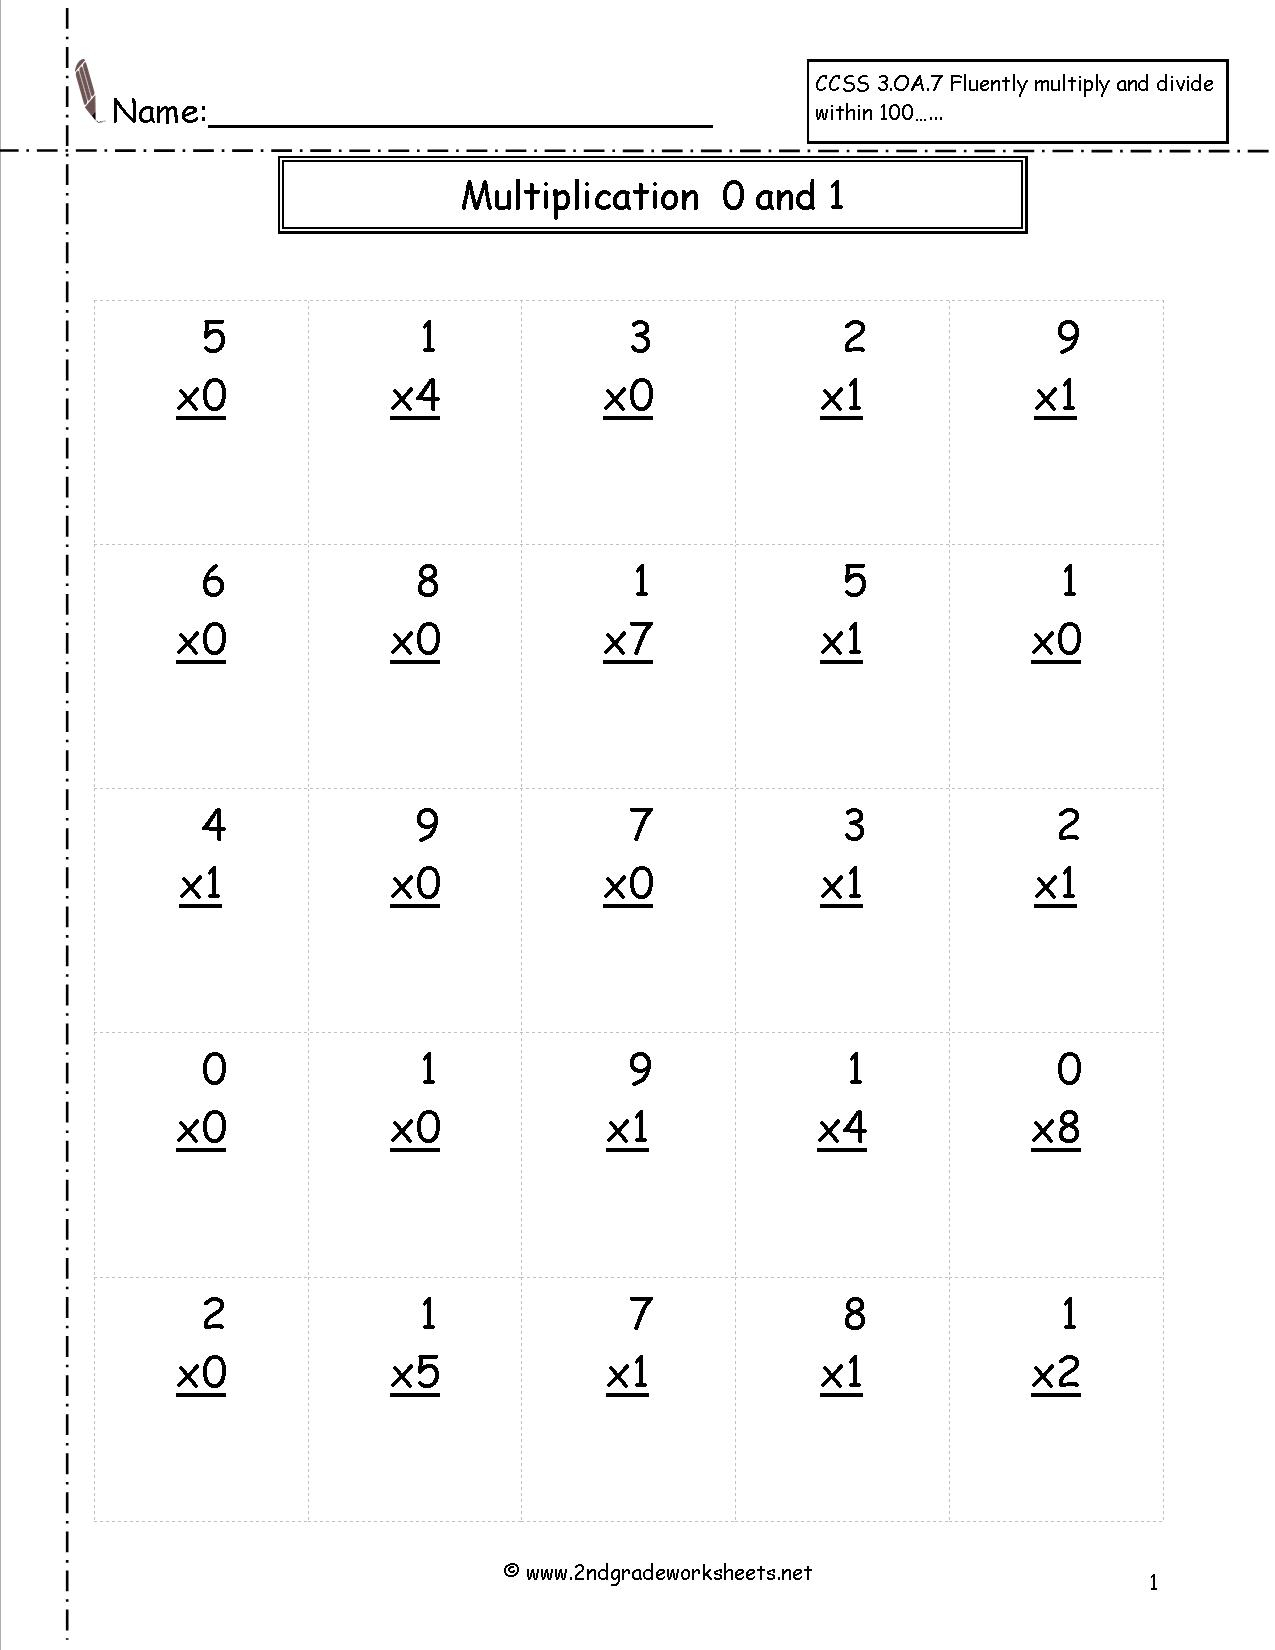 Multiplication Worksheets And Printouts pertaining to Worksheets Multiplication Grade 2